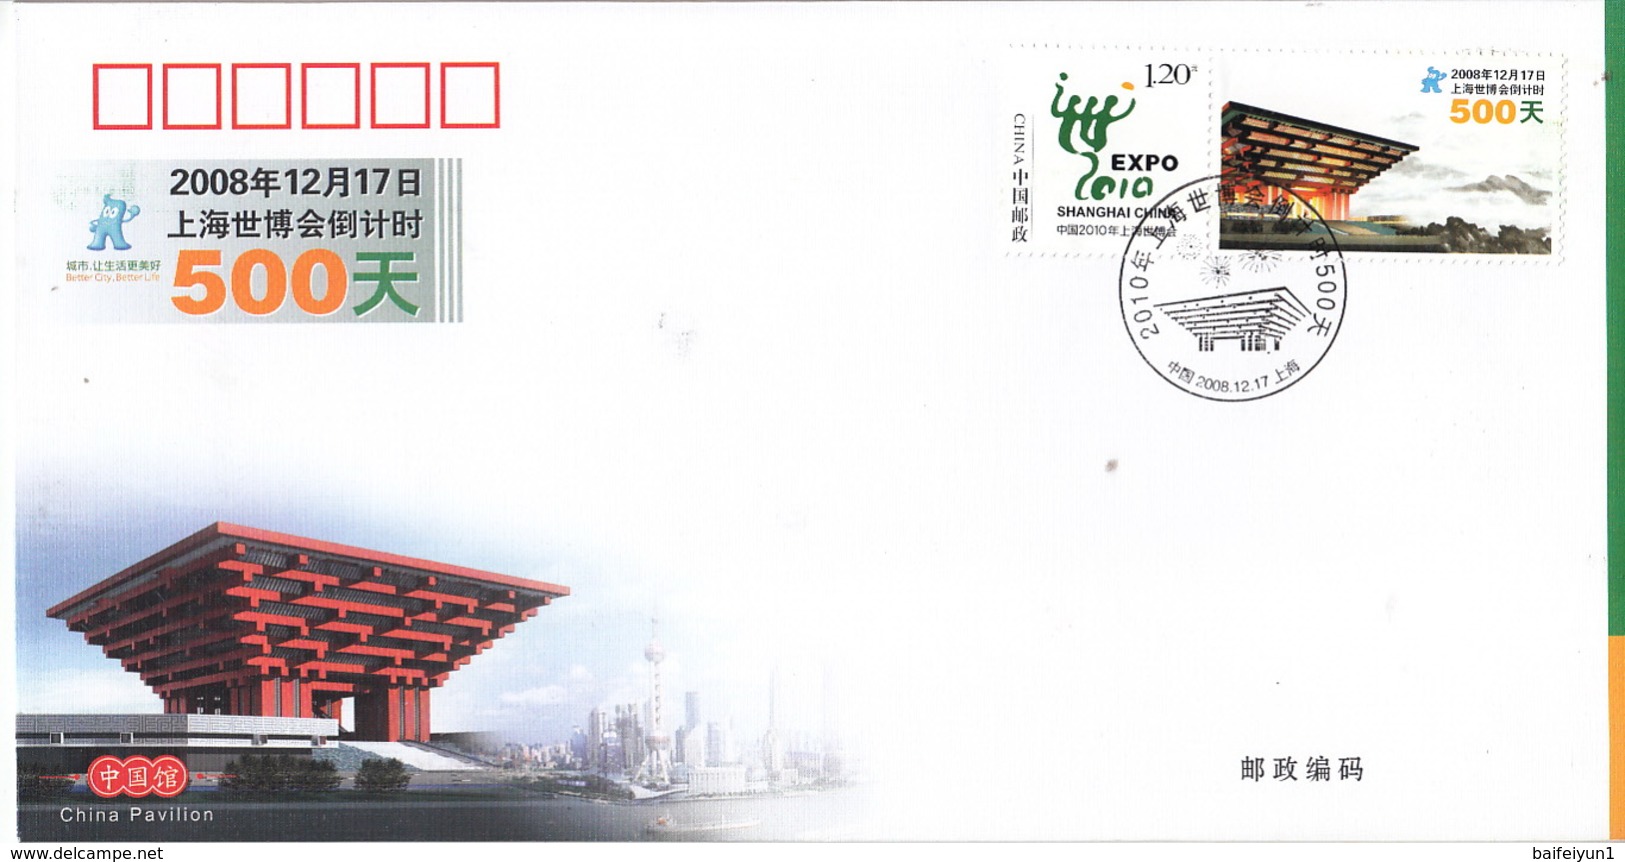 China 2010 Expo 2010 Shanghai stamps FDC and Commemorative covers(15 covers)